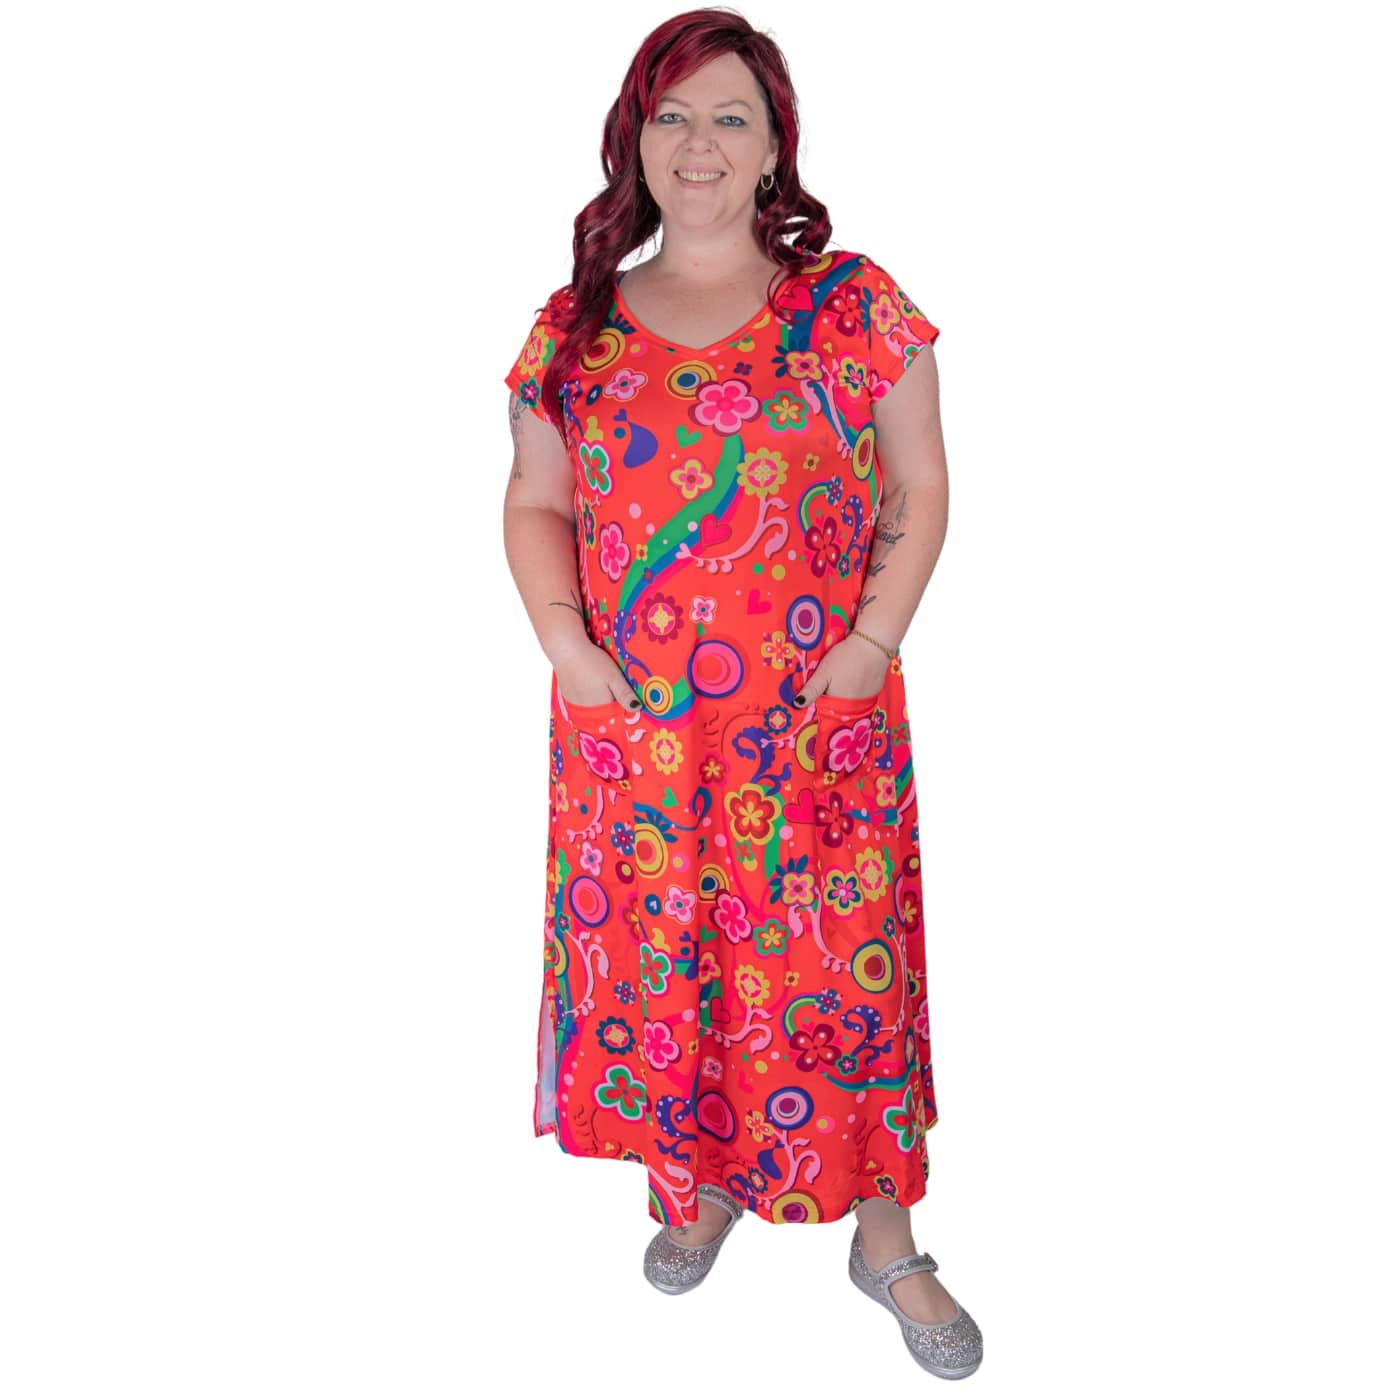 Groovy Remix Maxi Dress by RainbowsAndFairies.com.au (Woodstock - Psychedelic - Retro Print - Boho - Dress With Pockets - Long Dress - Vintage Inspired) - SKU: CL_MAXID_GROOV_REM - Pic-01